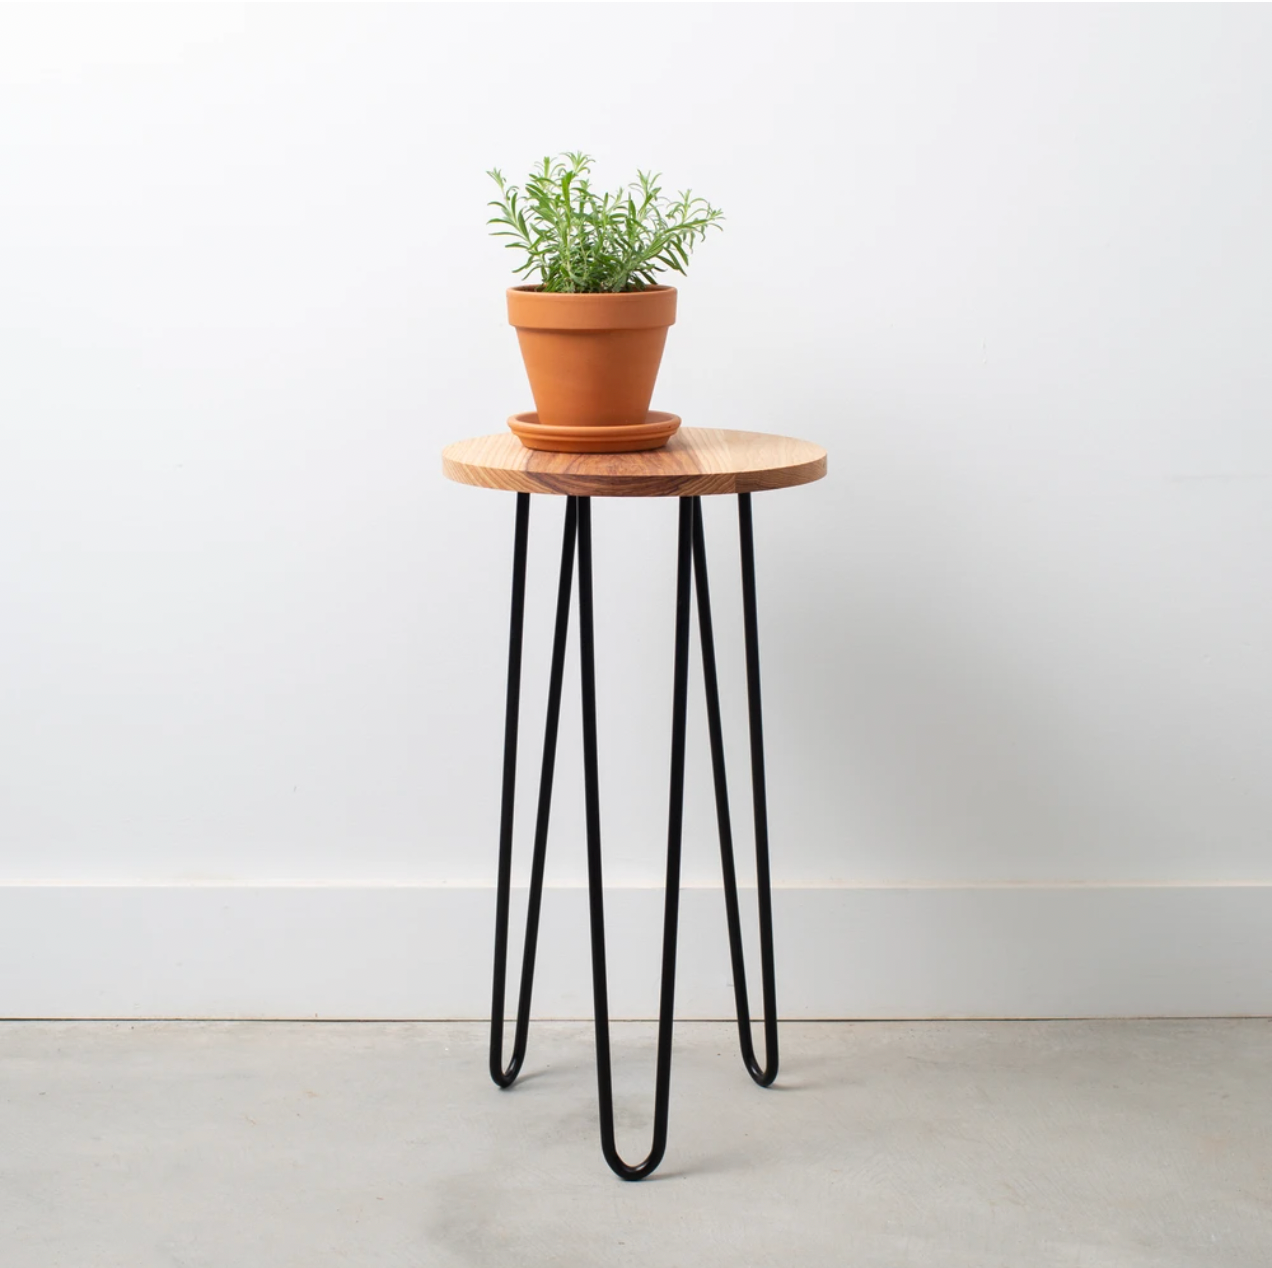 Harp Design Co. Side Table Plant Stand Large